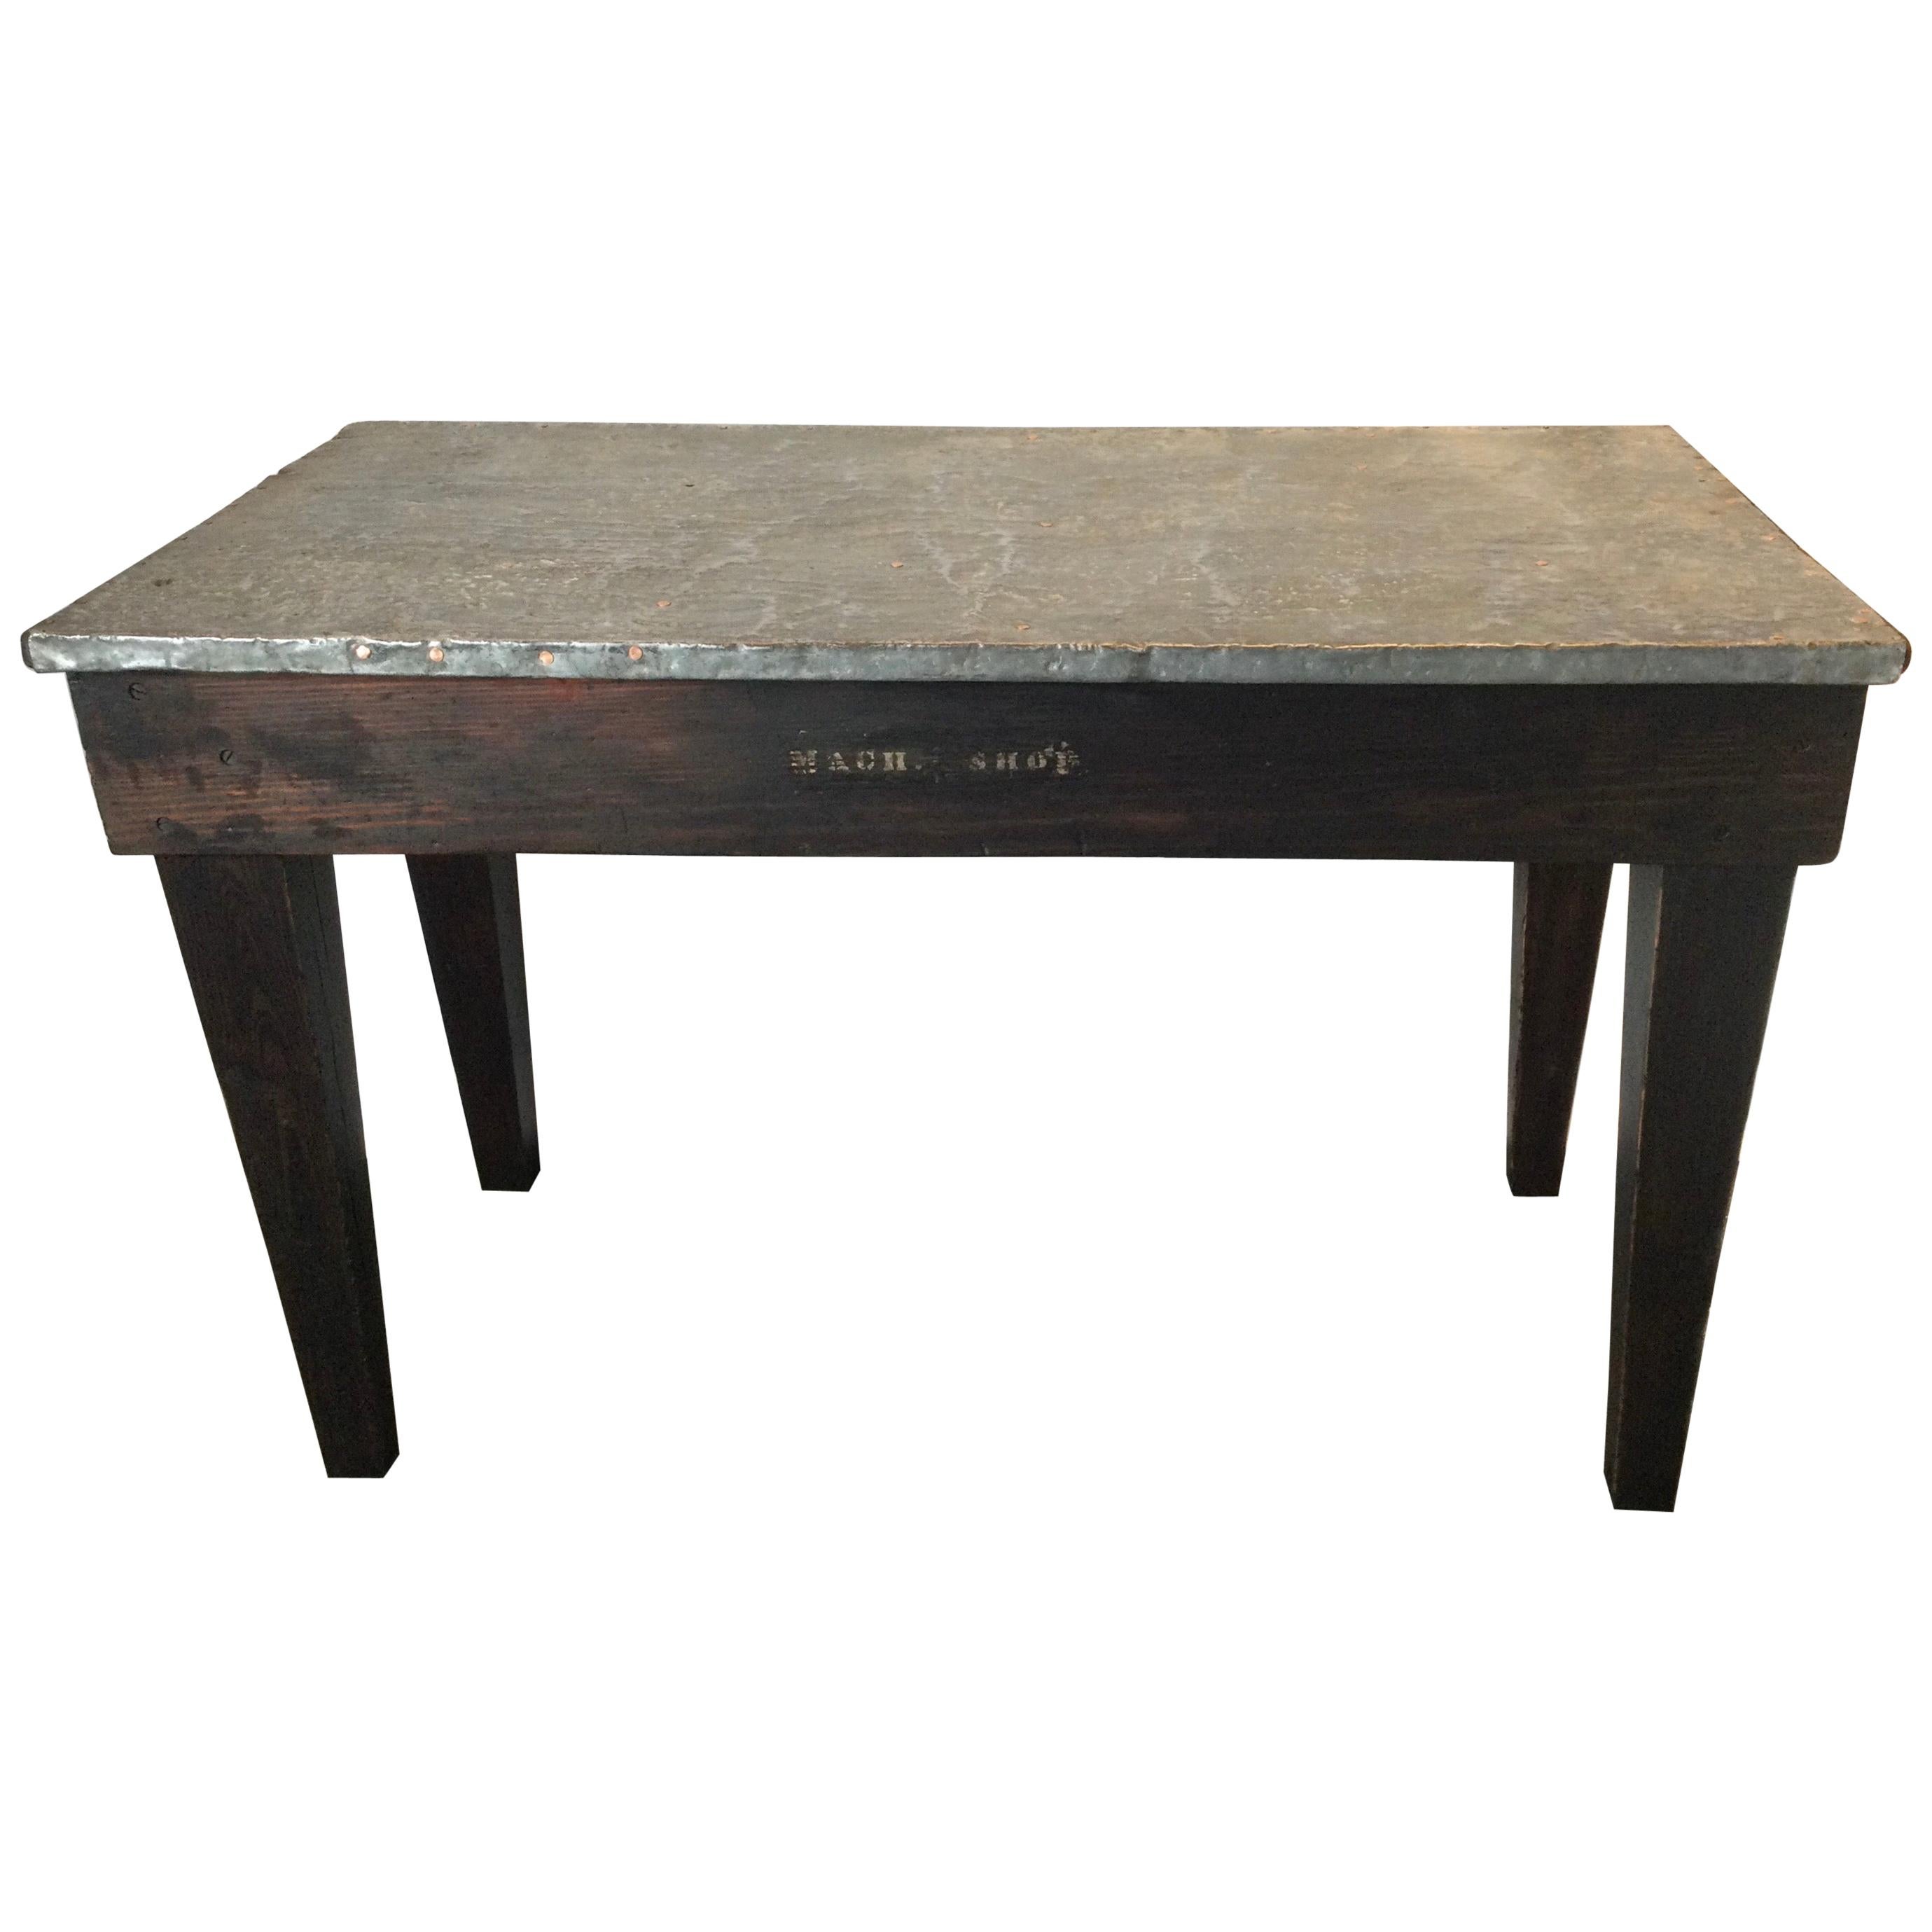 Industrial Wood and Metal Machine Shop Work Table Desk Bench